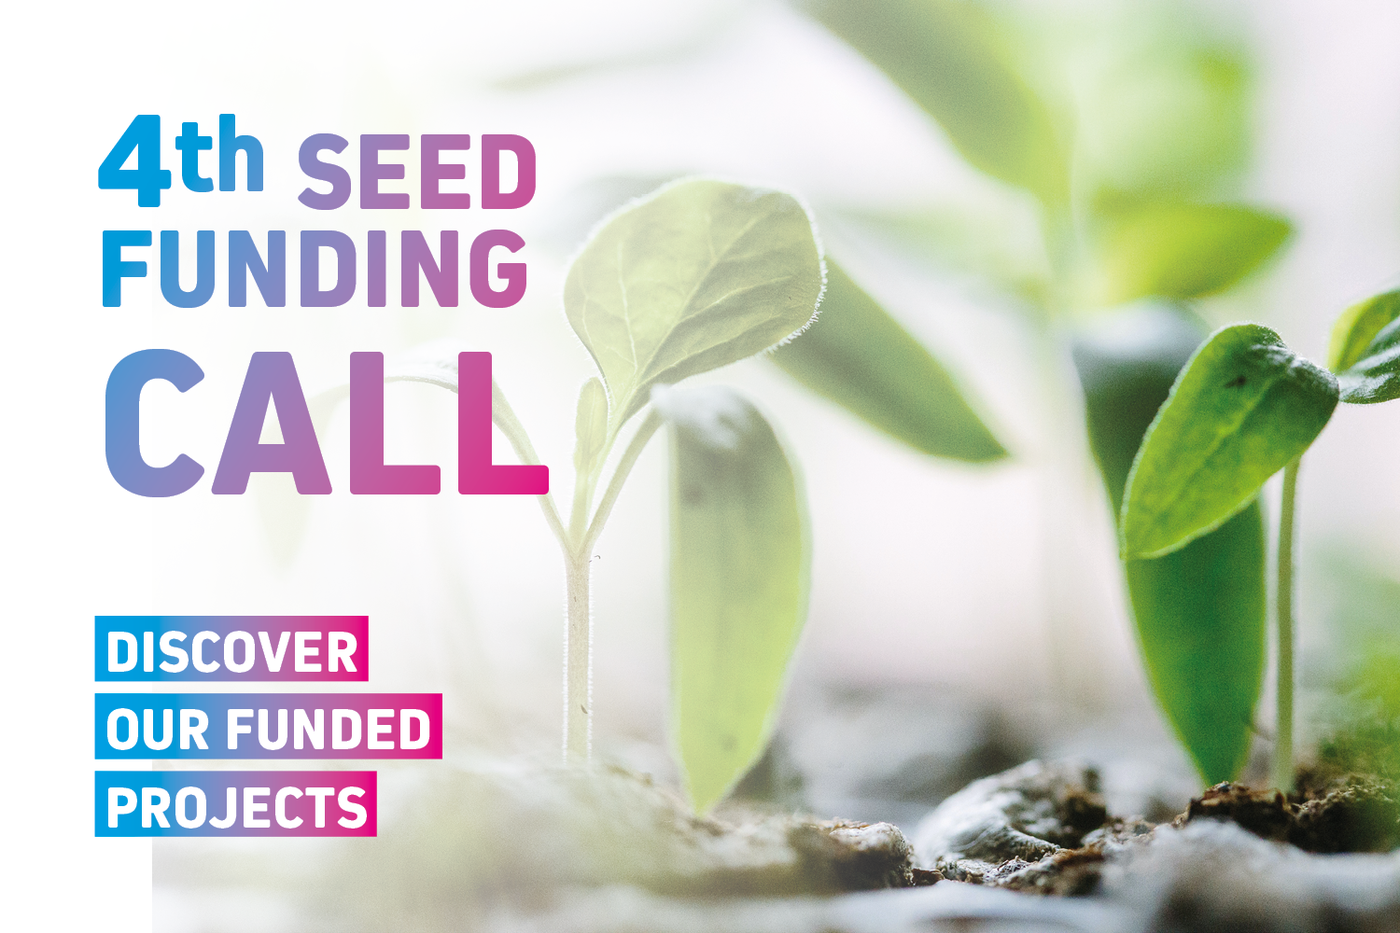 The picture shows a few green seedling in the background and the text "Fourth Seed Funding Call: Discover our funded projects".